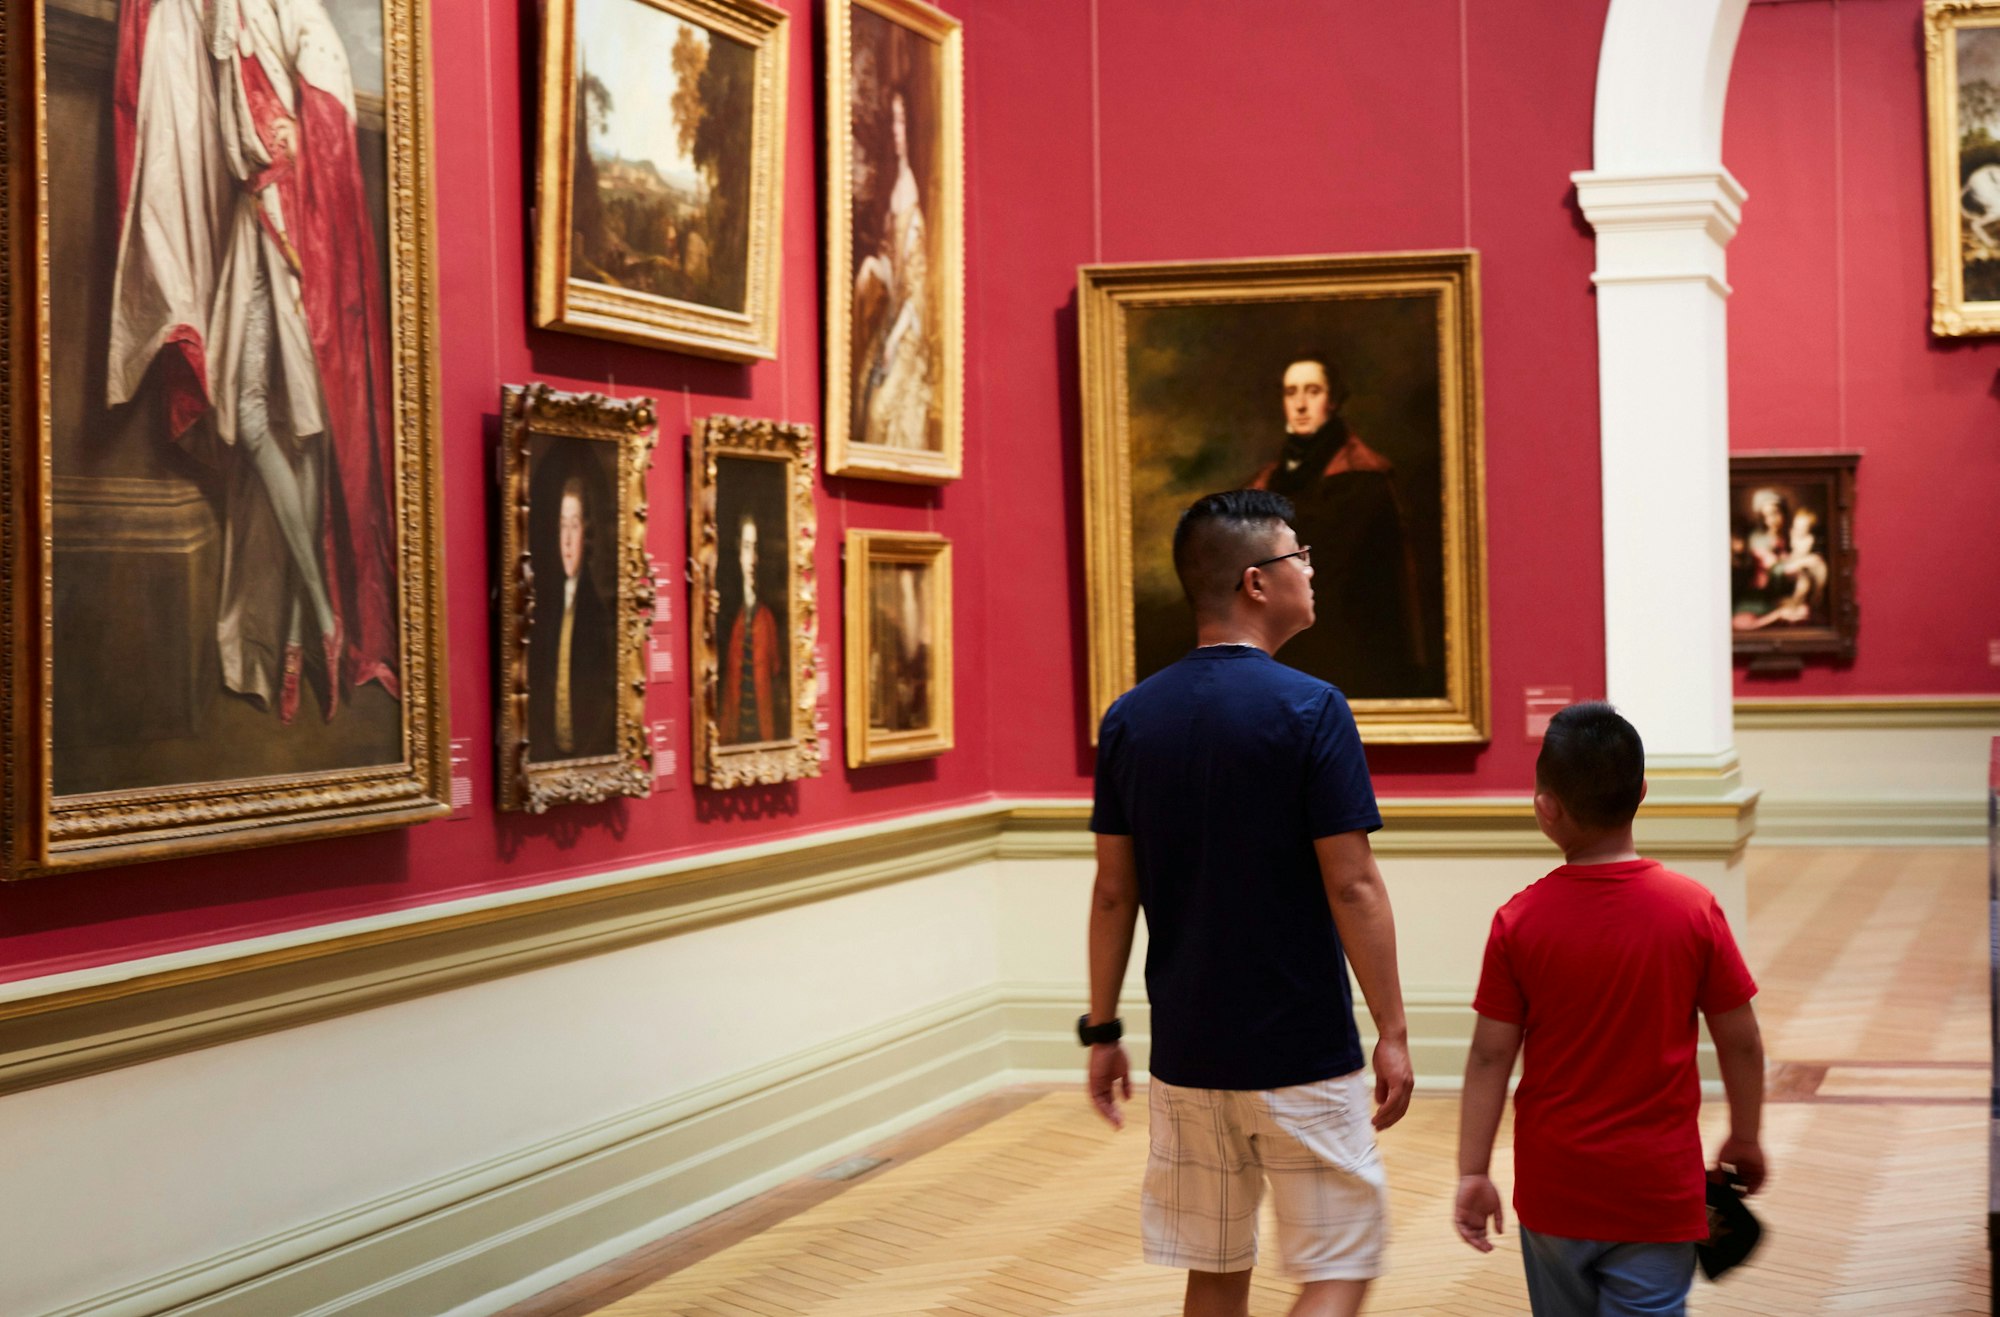 Visitors in the Grand Courts at the Art Gallery of New South Wales